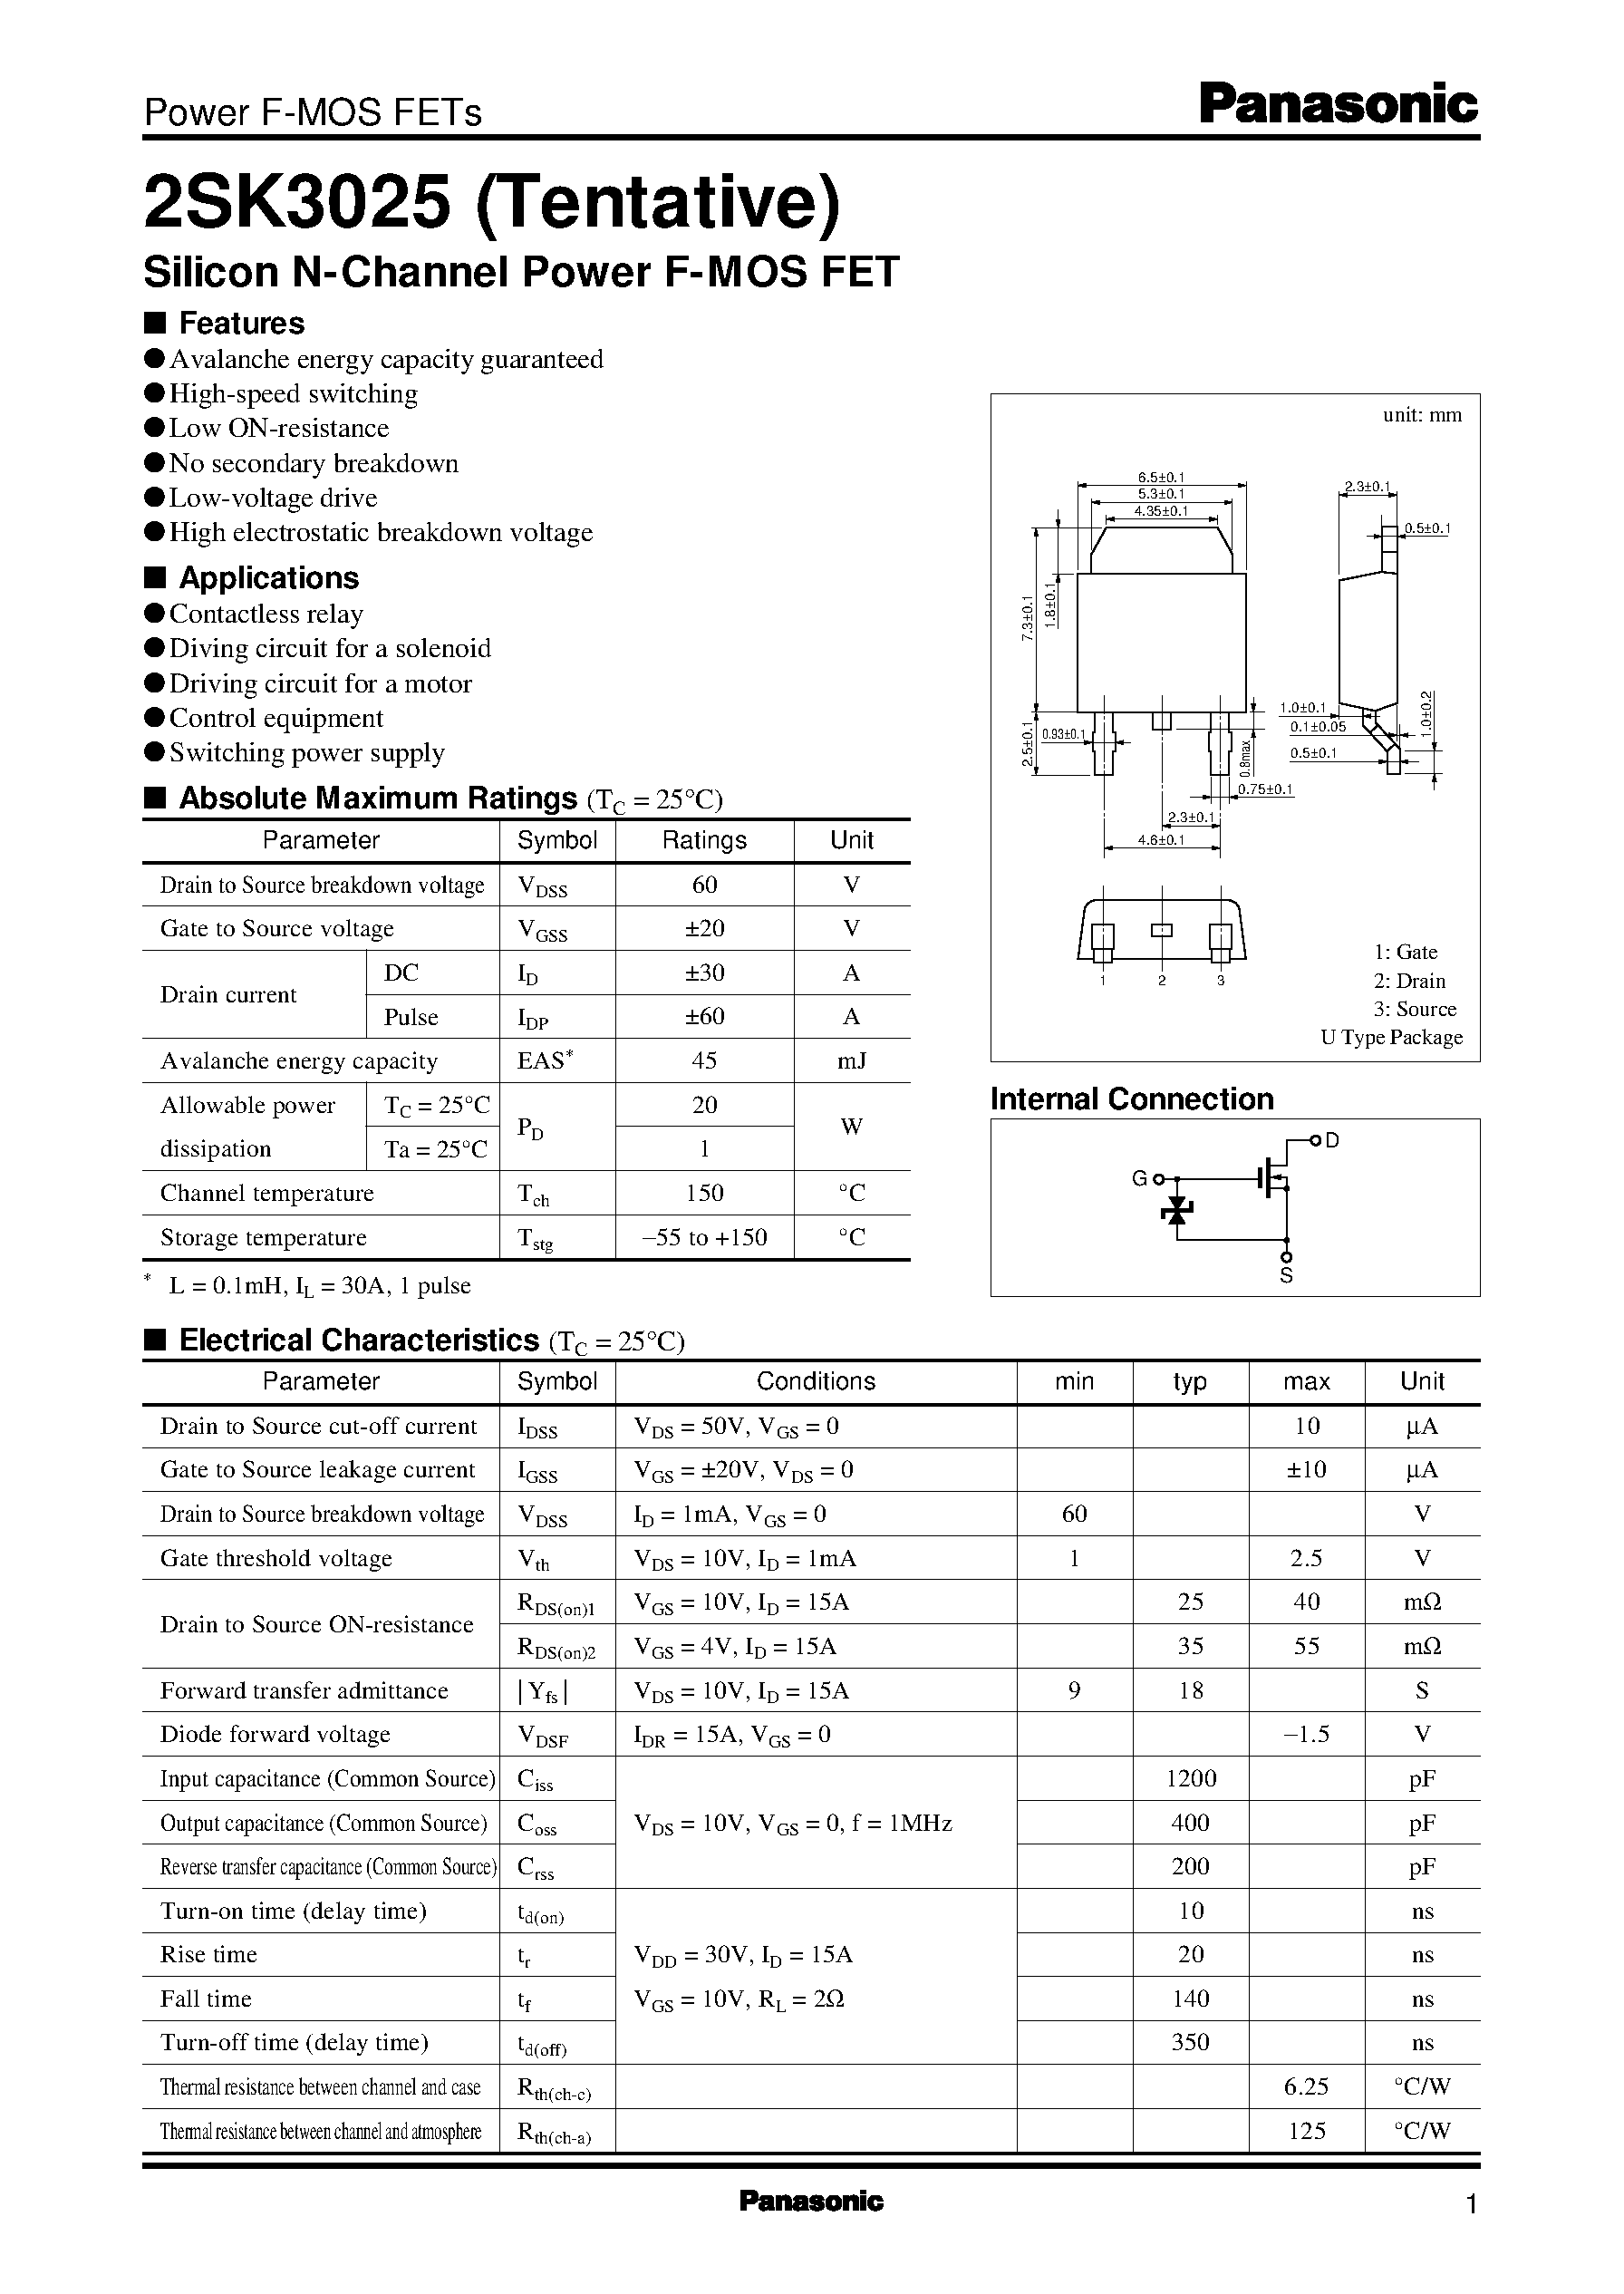 Datasheet 2SK3025 - Silicon N-Channel Power F-MOS FET page 1